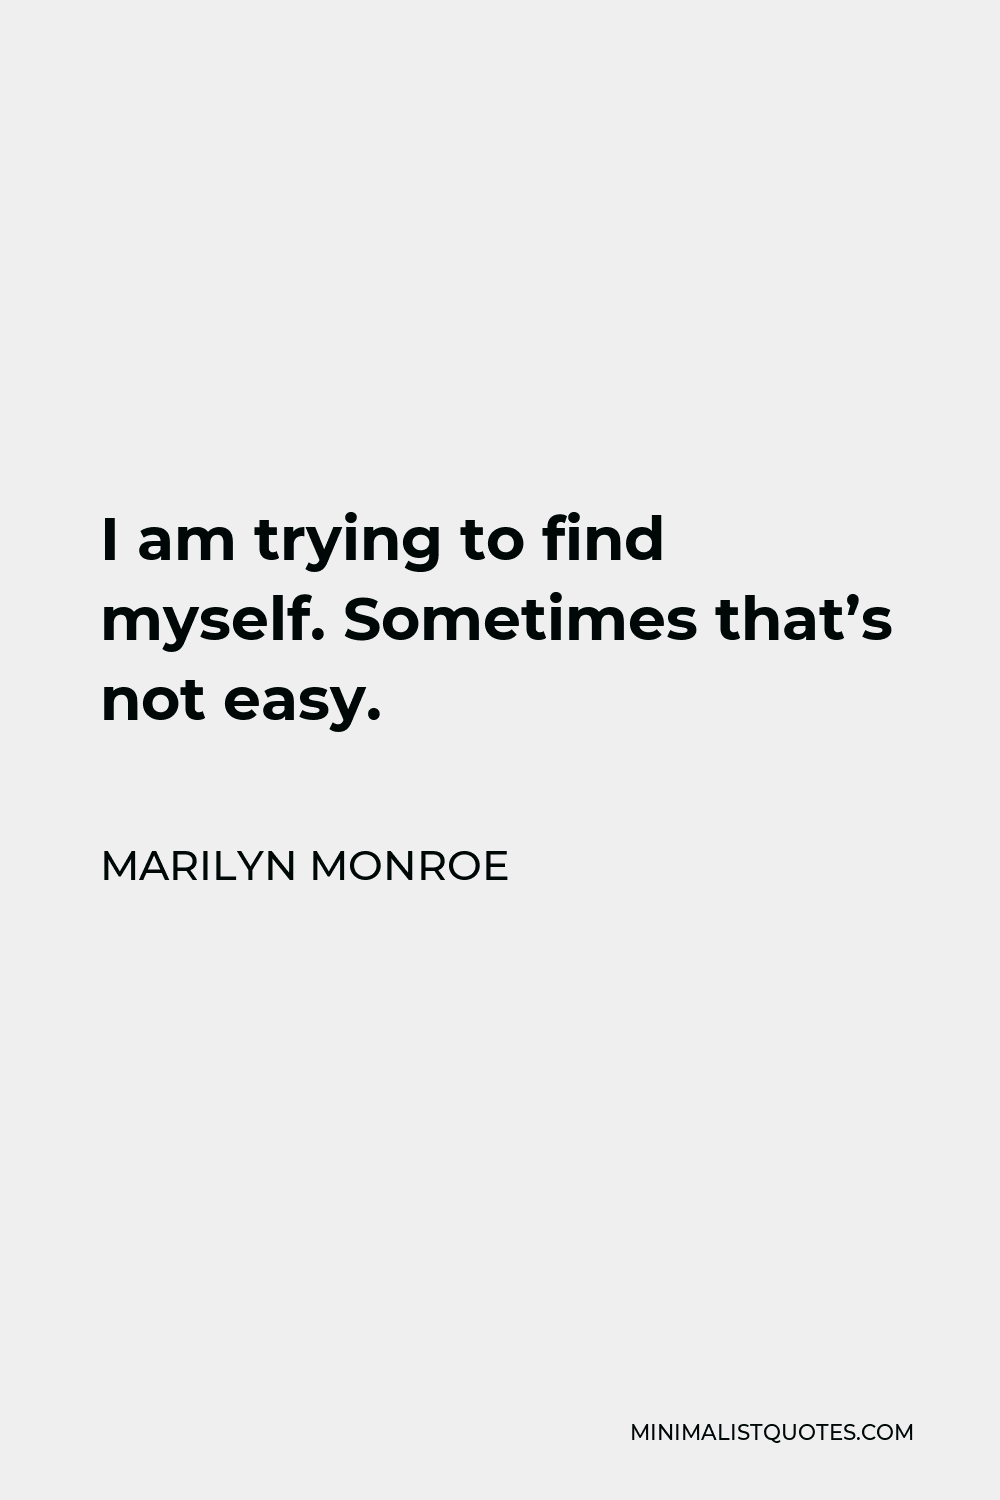 Marilyn Monroe Quote - I am trying to find myself. Sometimes that’s not easy.